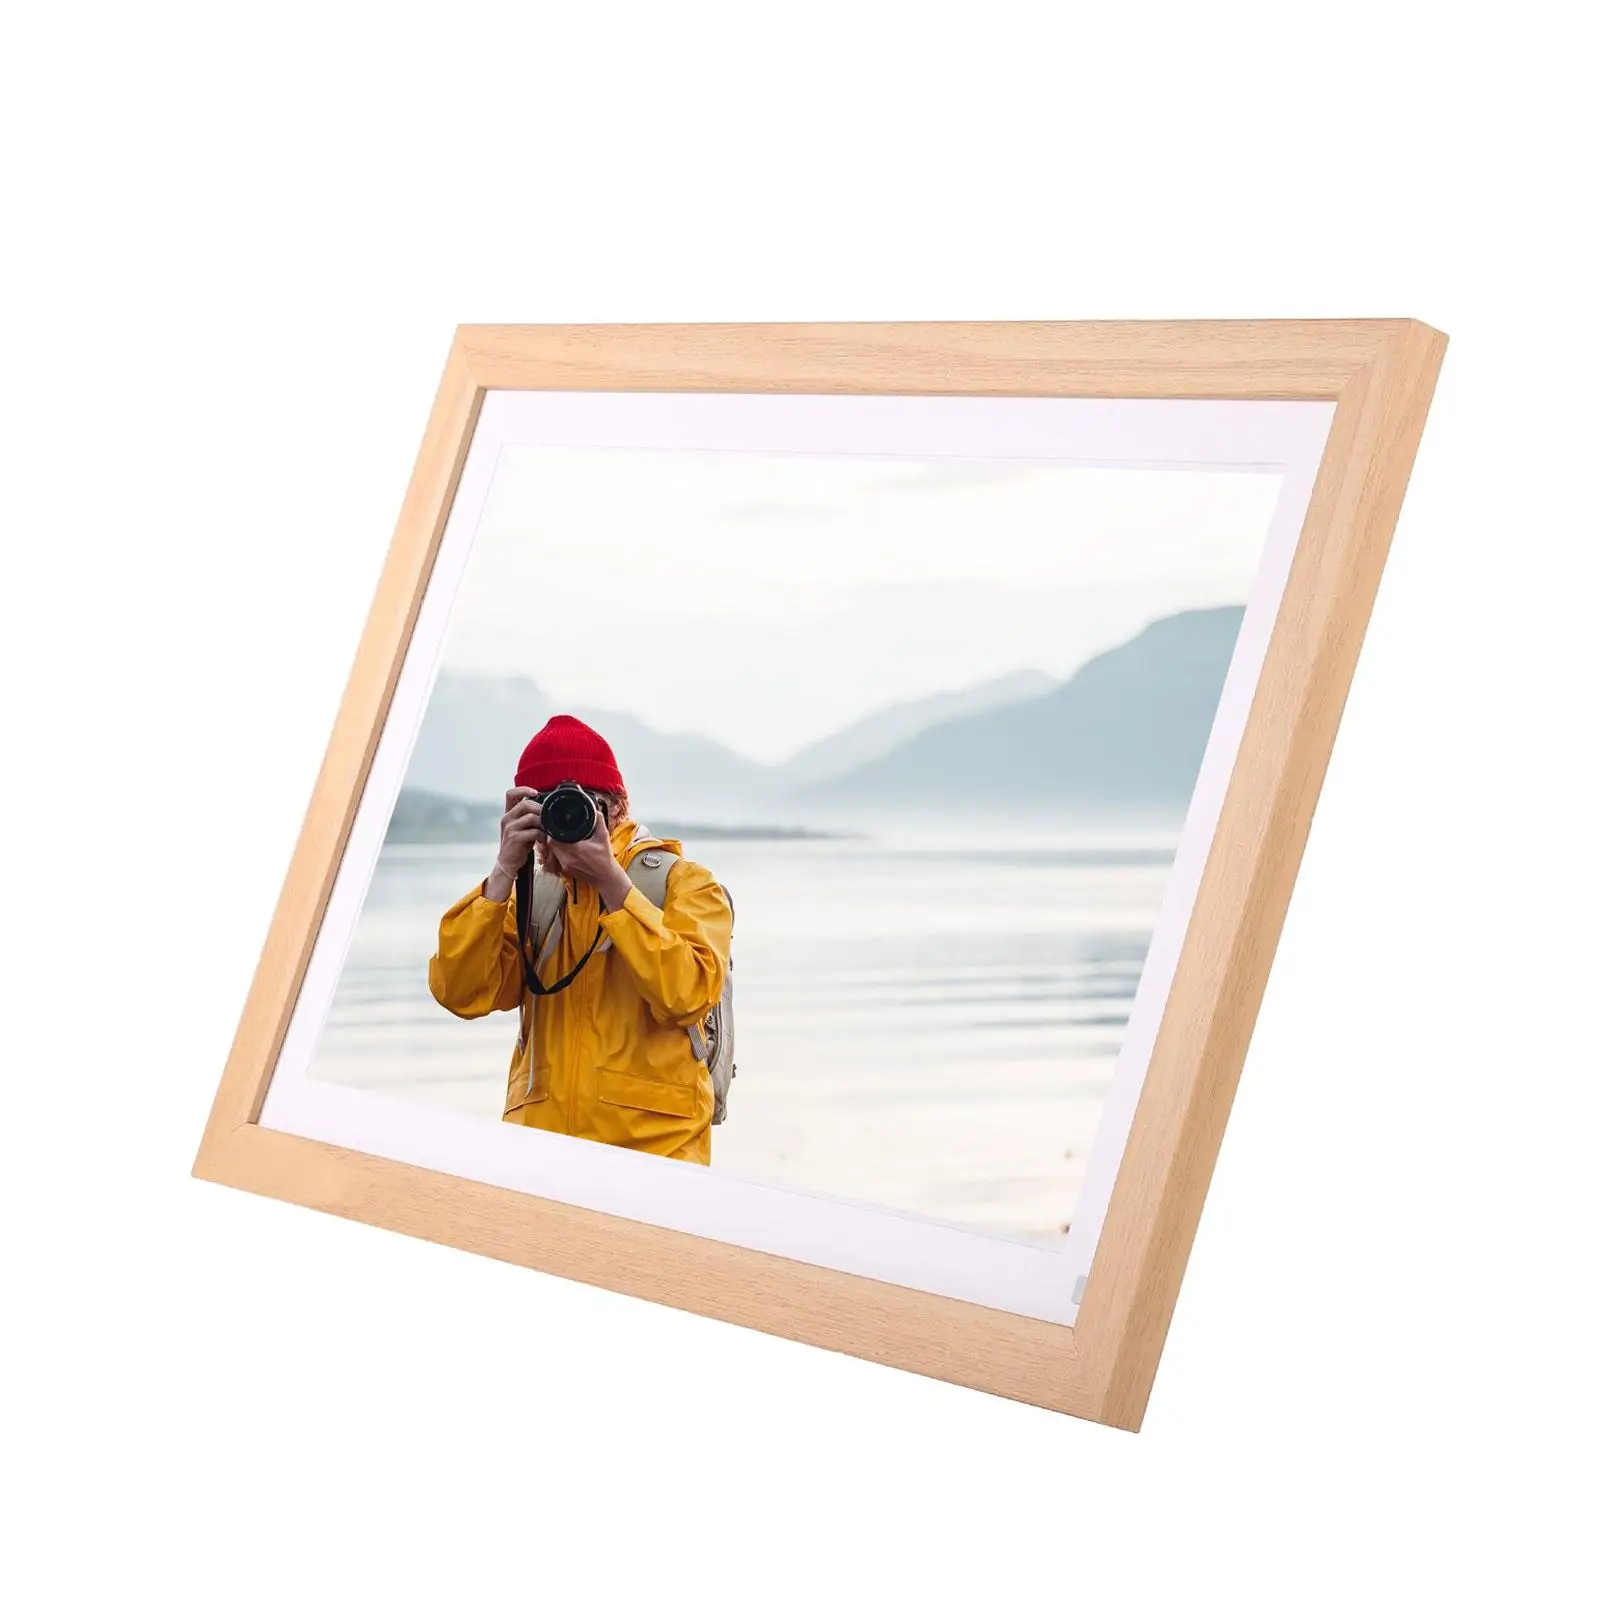 1920x1080 IPS Touch Screen Digital Photo Frame with 32GB Storage Share Moments Instantly Photo Frame for Birthday Gifts